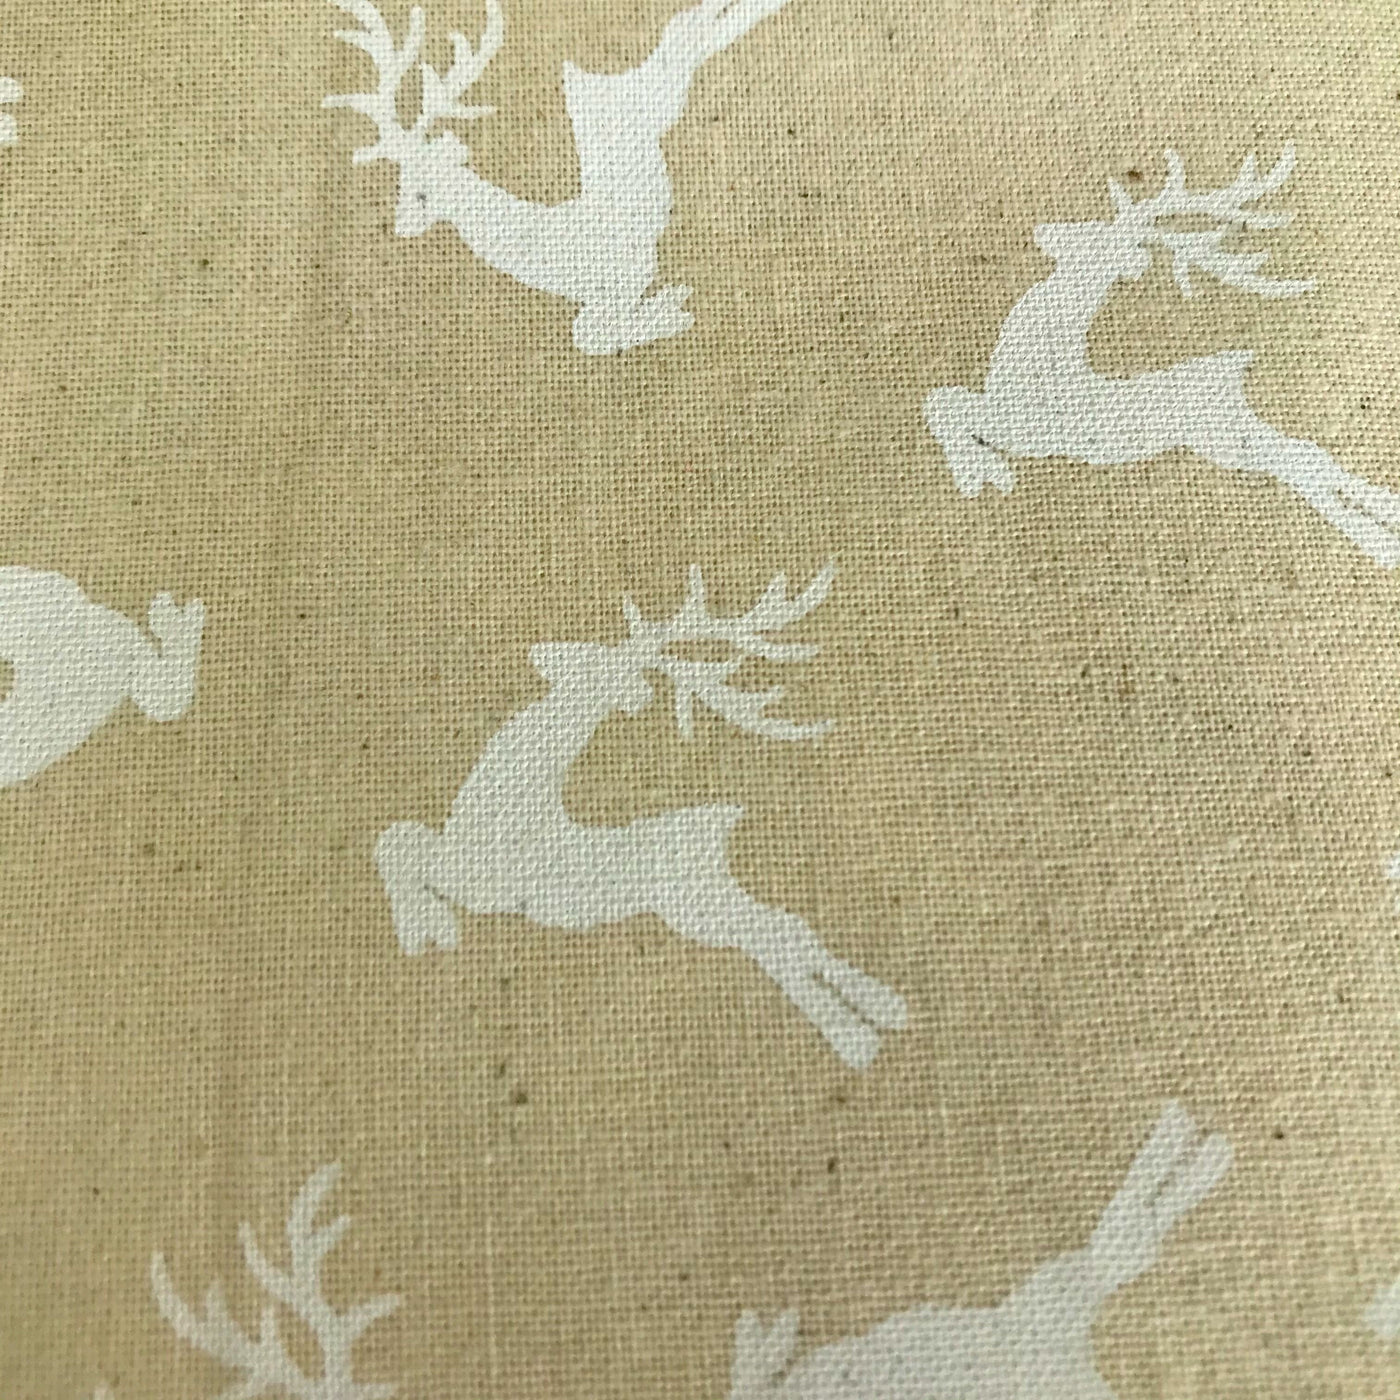 John loundens christmas stags on a natural cotton background